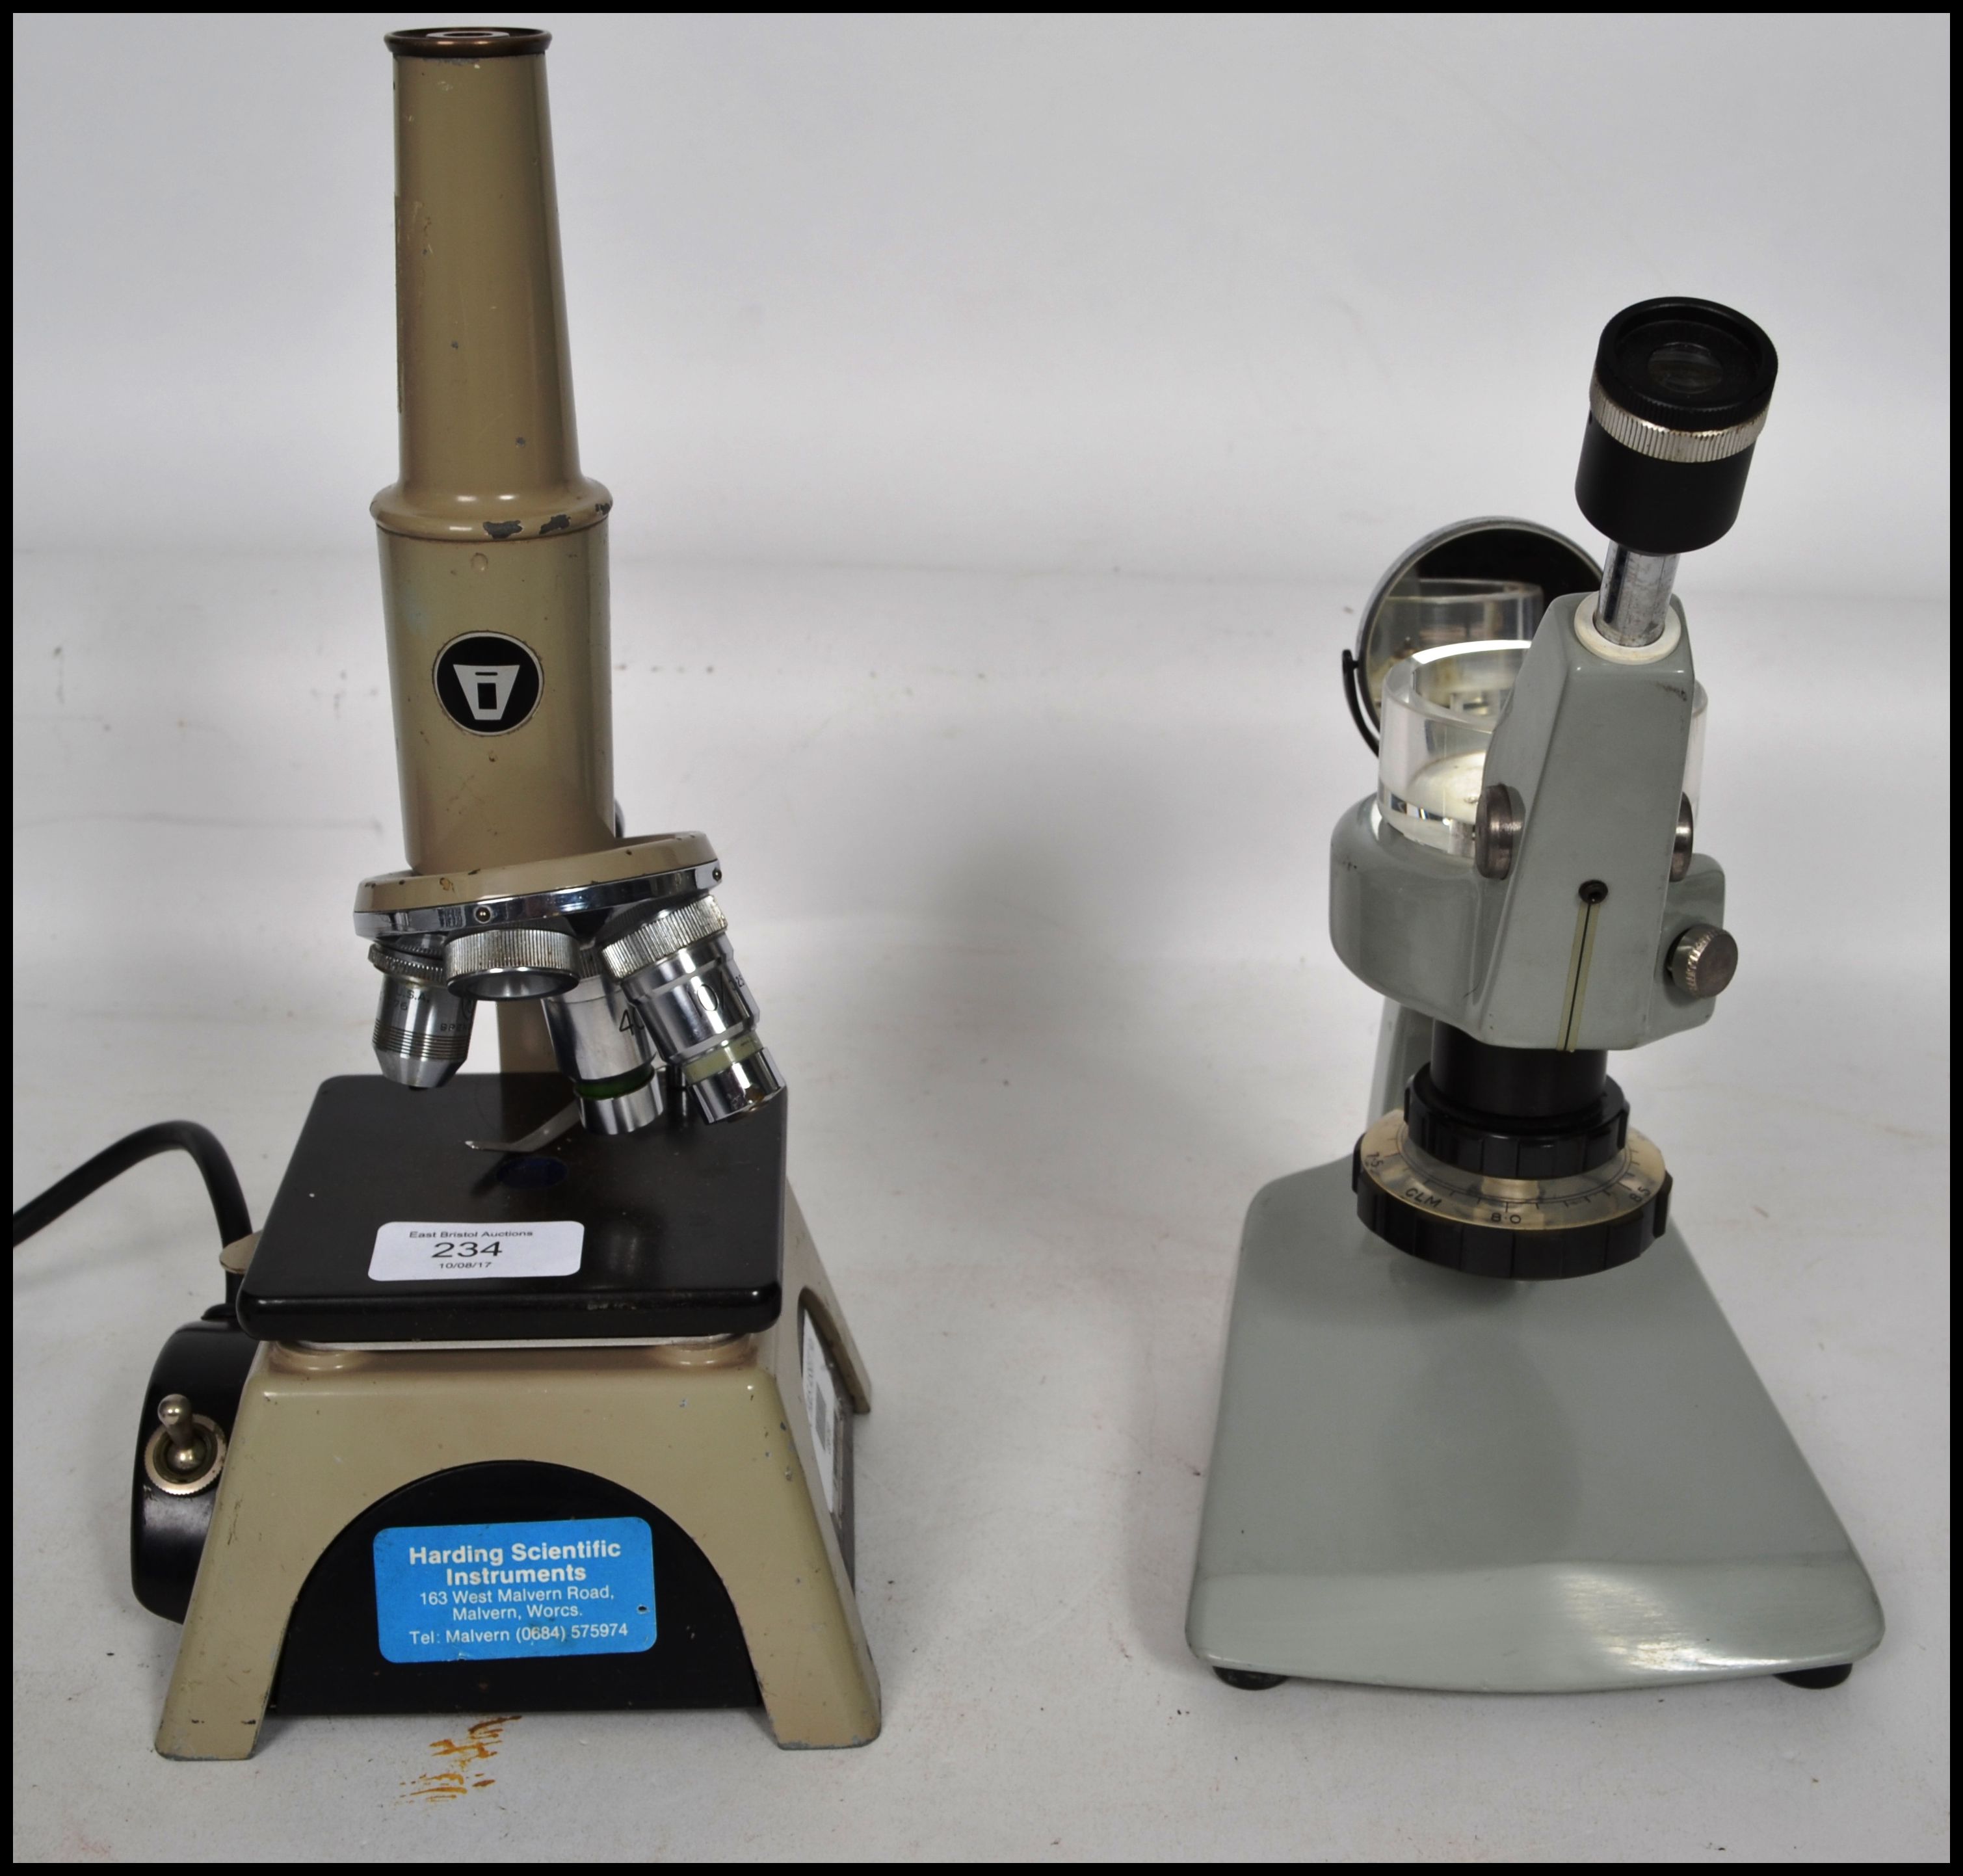 A vintage 20th century microscope with three objec